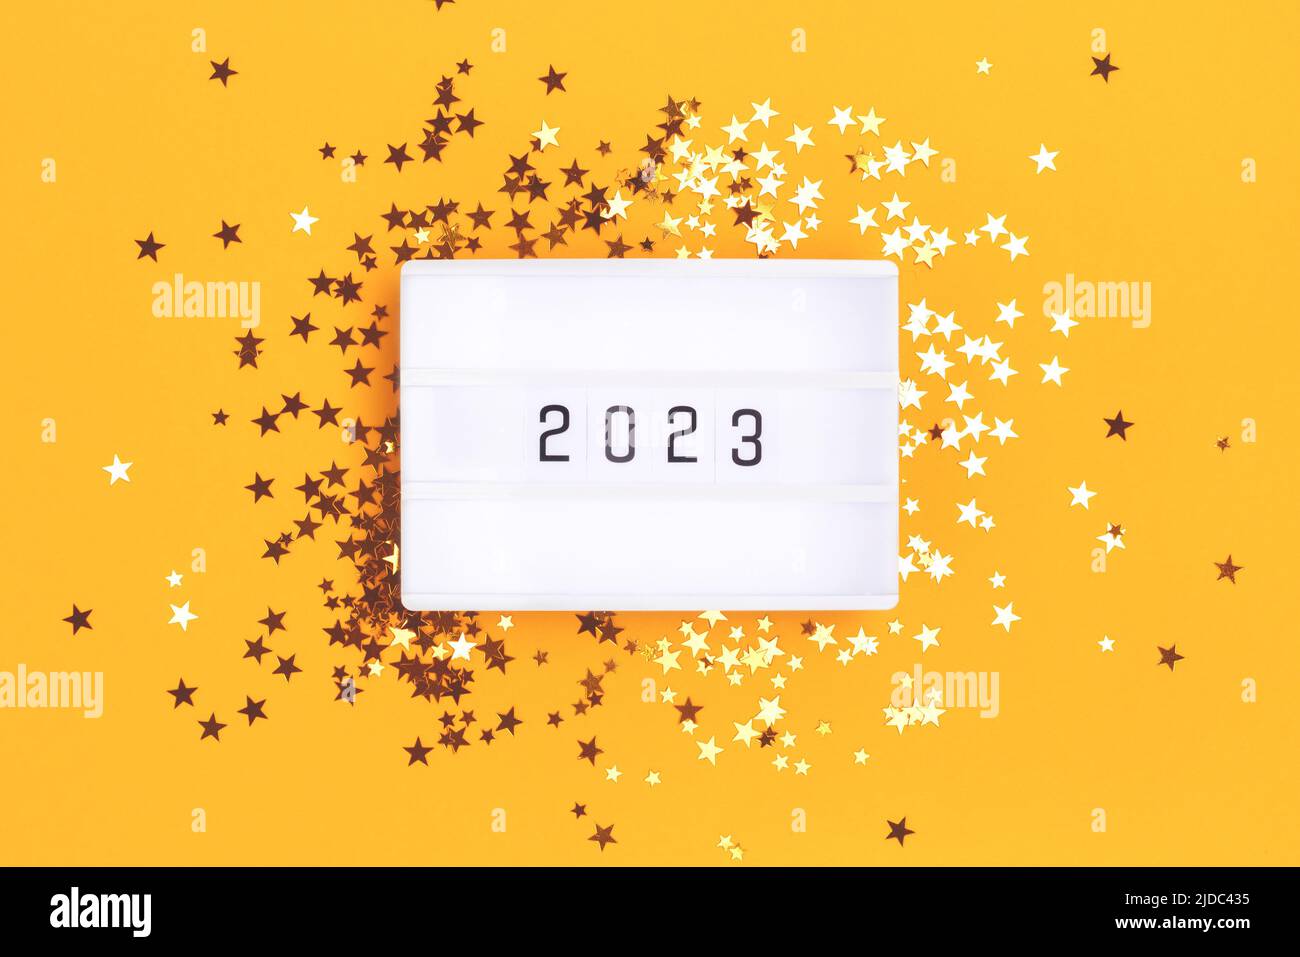 New 2023 Year concept. Lightbox and golden stars confetti on a yellow background. Stock Photo